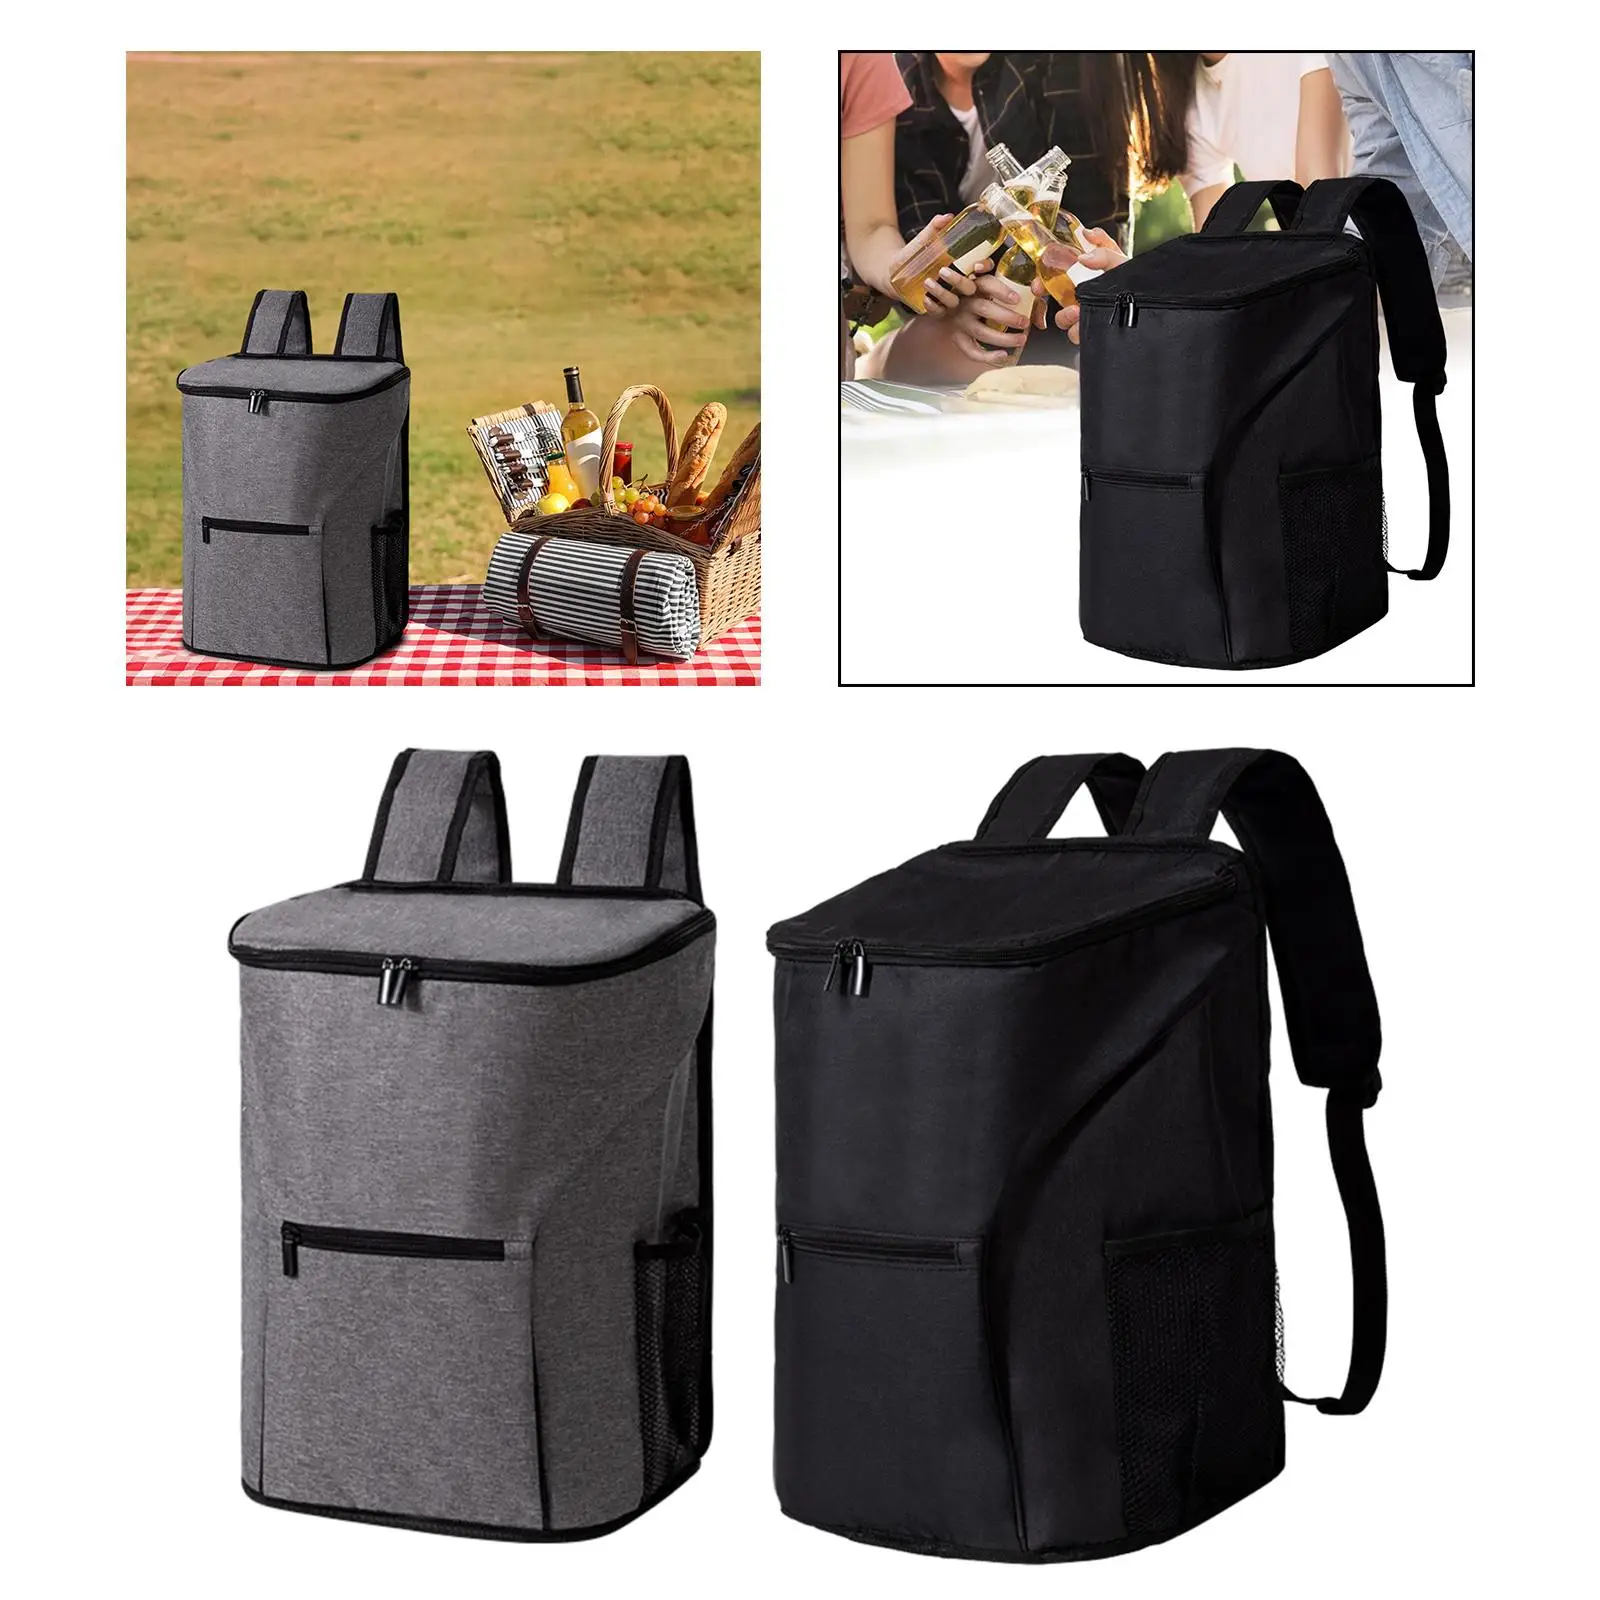 Insulated Cooler Bag Insulated Backpack for Park Day Trips Fishing Picnic